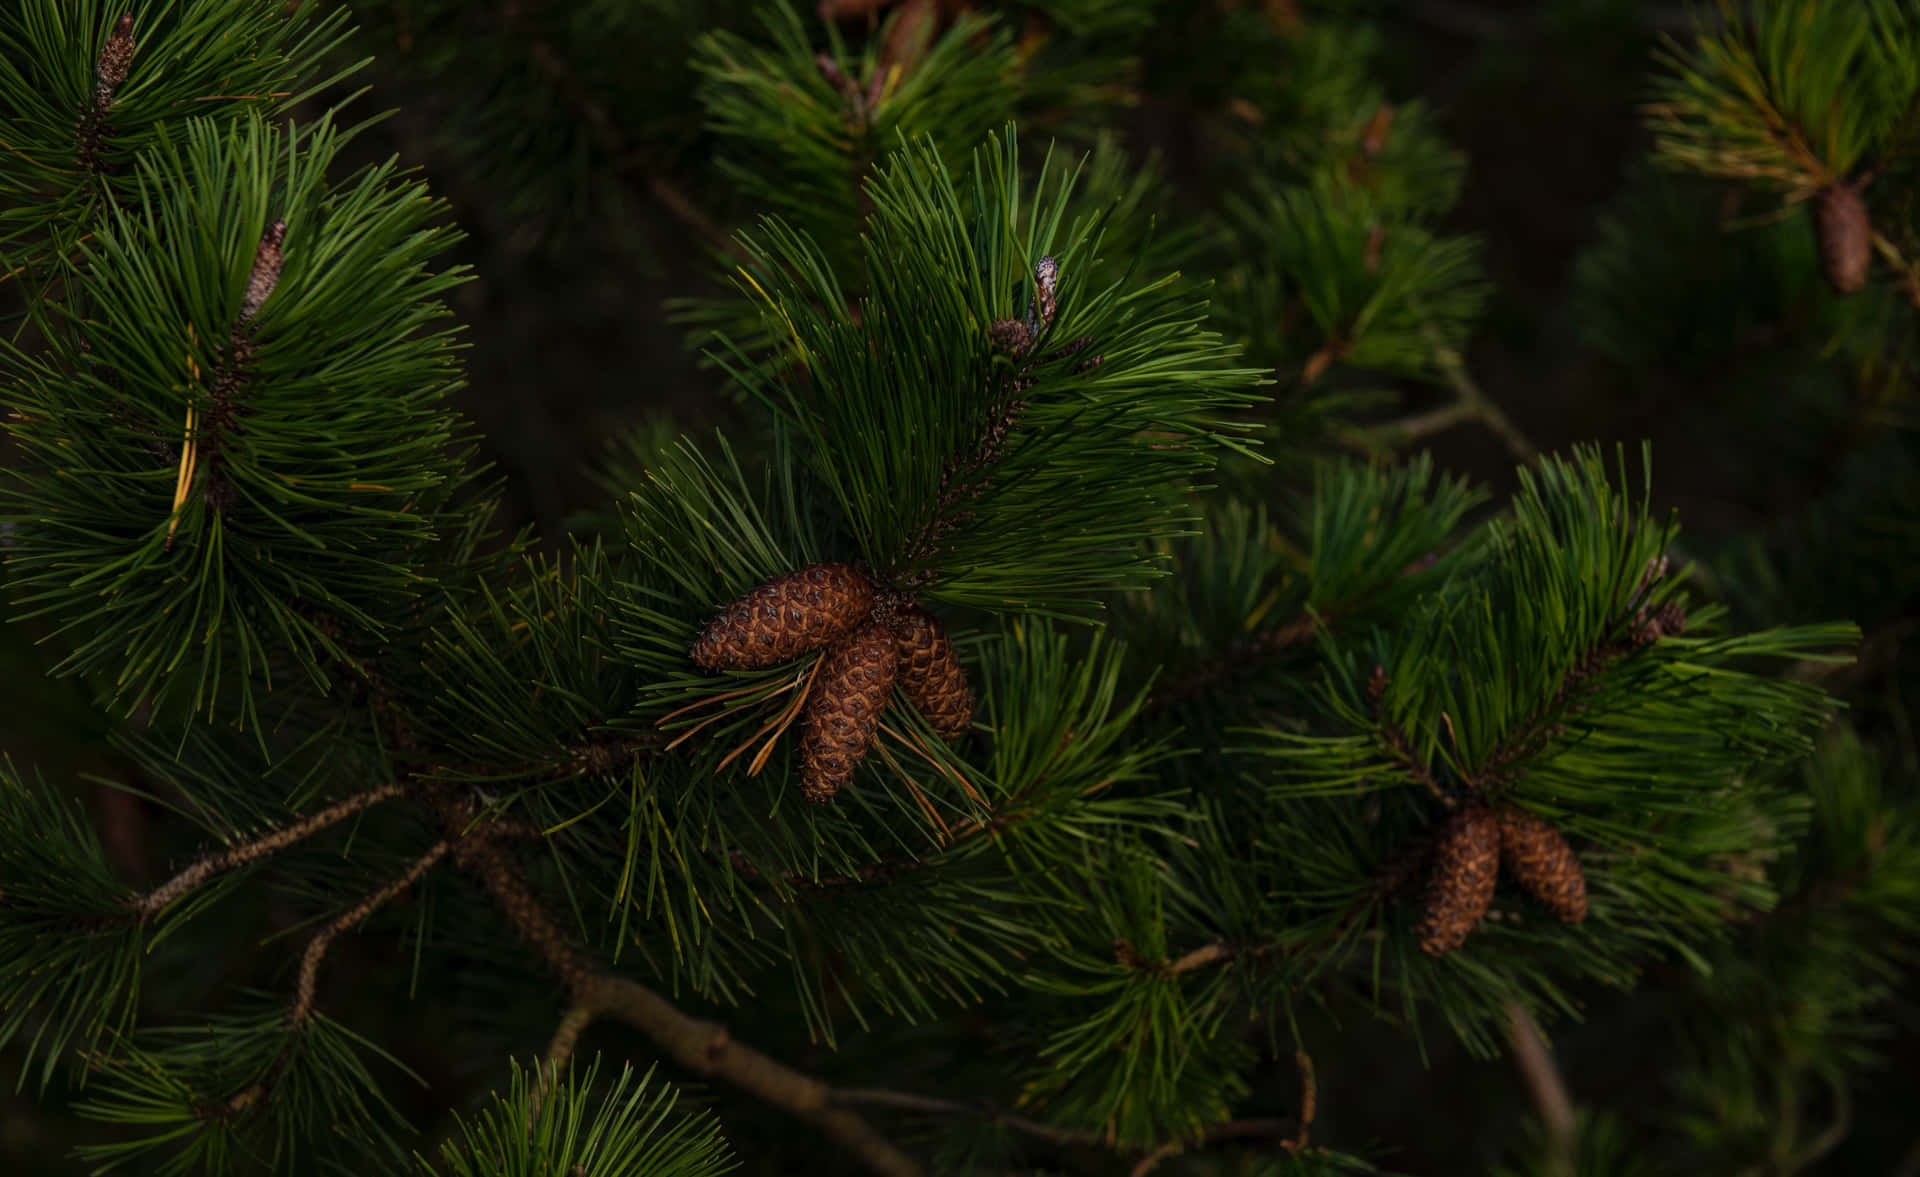 Pine Branches Wallpaper - Beautiful and Serene